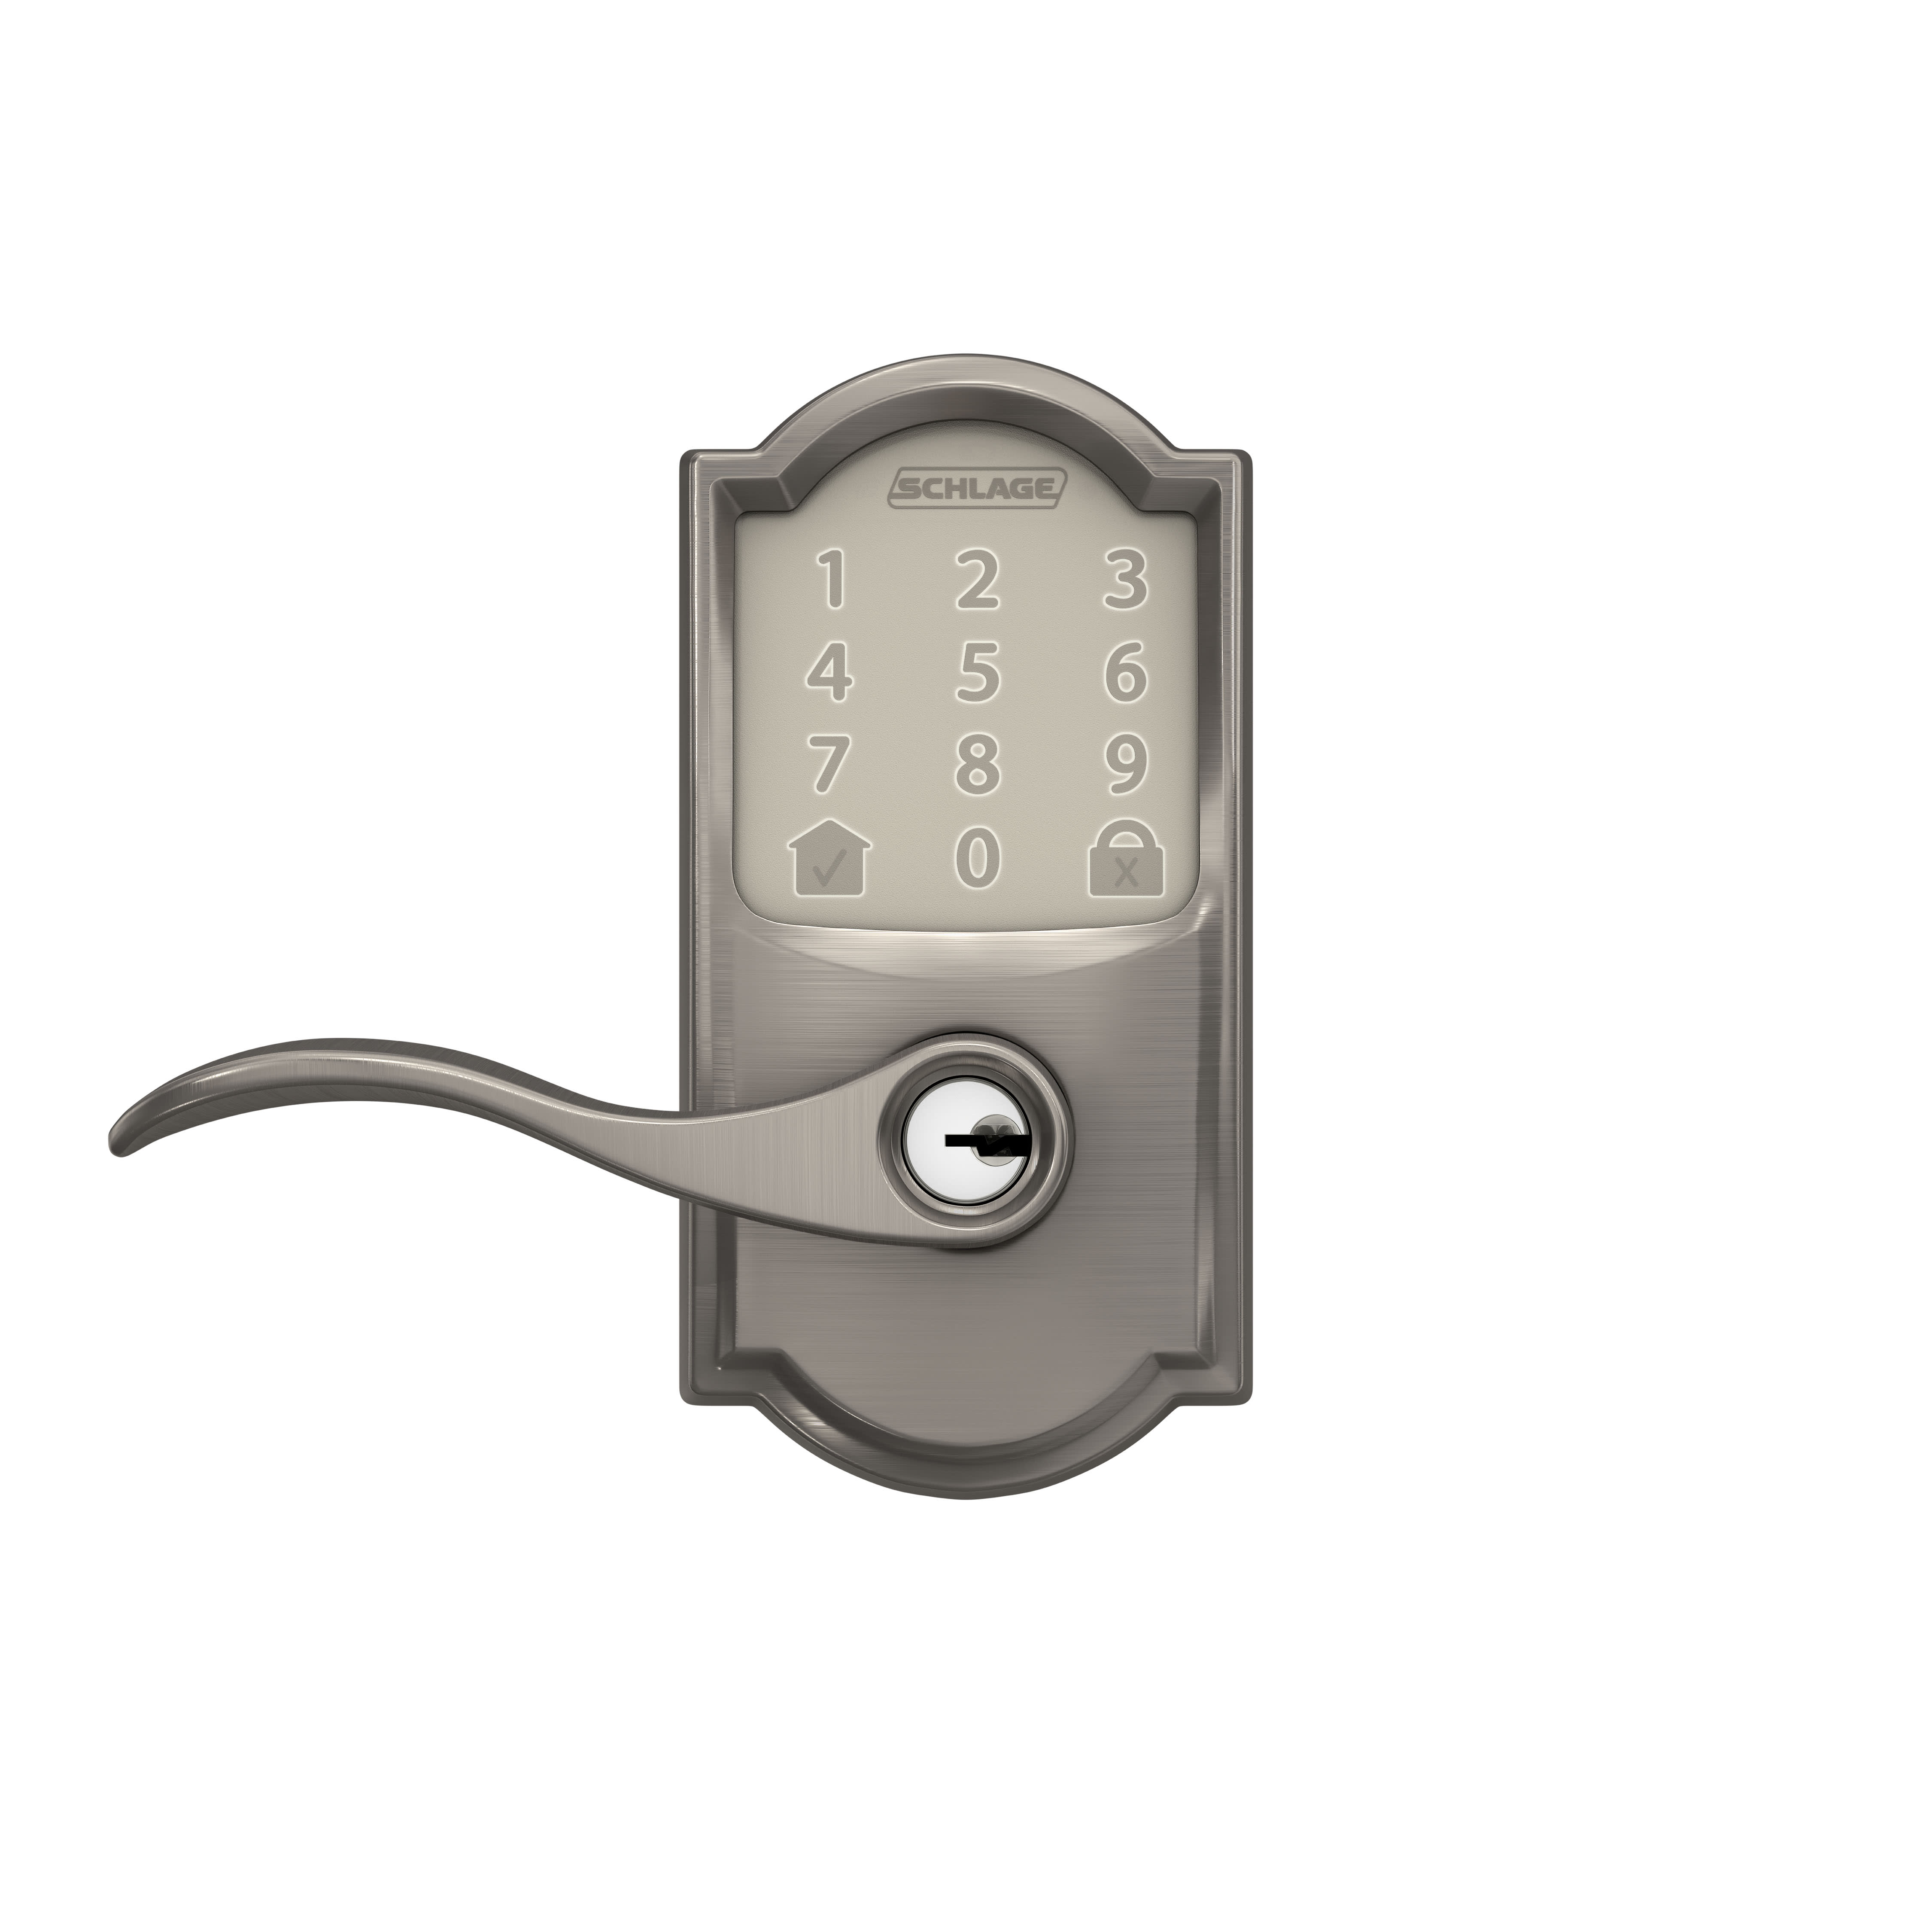 Schlage FE789WBCAM619ACC Satin Nickel Encode WiFi Enabled Electronic Keypad  Accent Door Lever with Camelot Trim